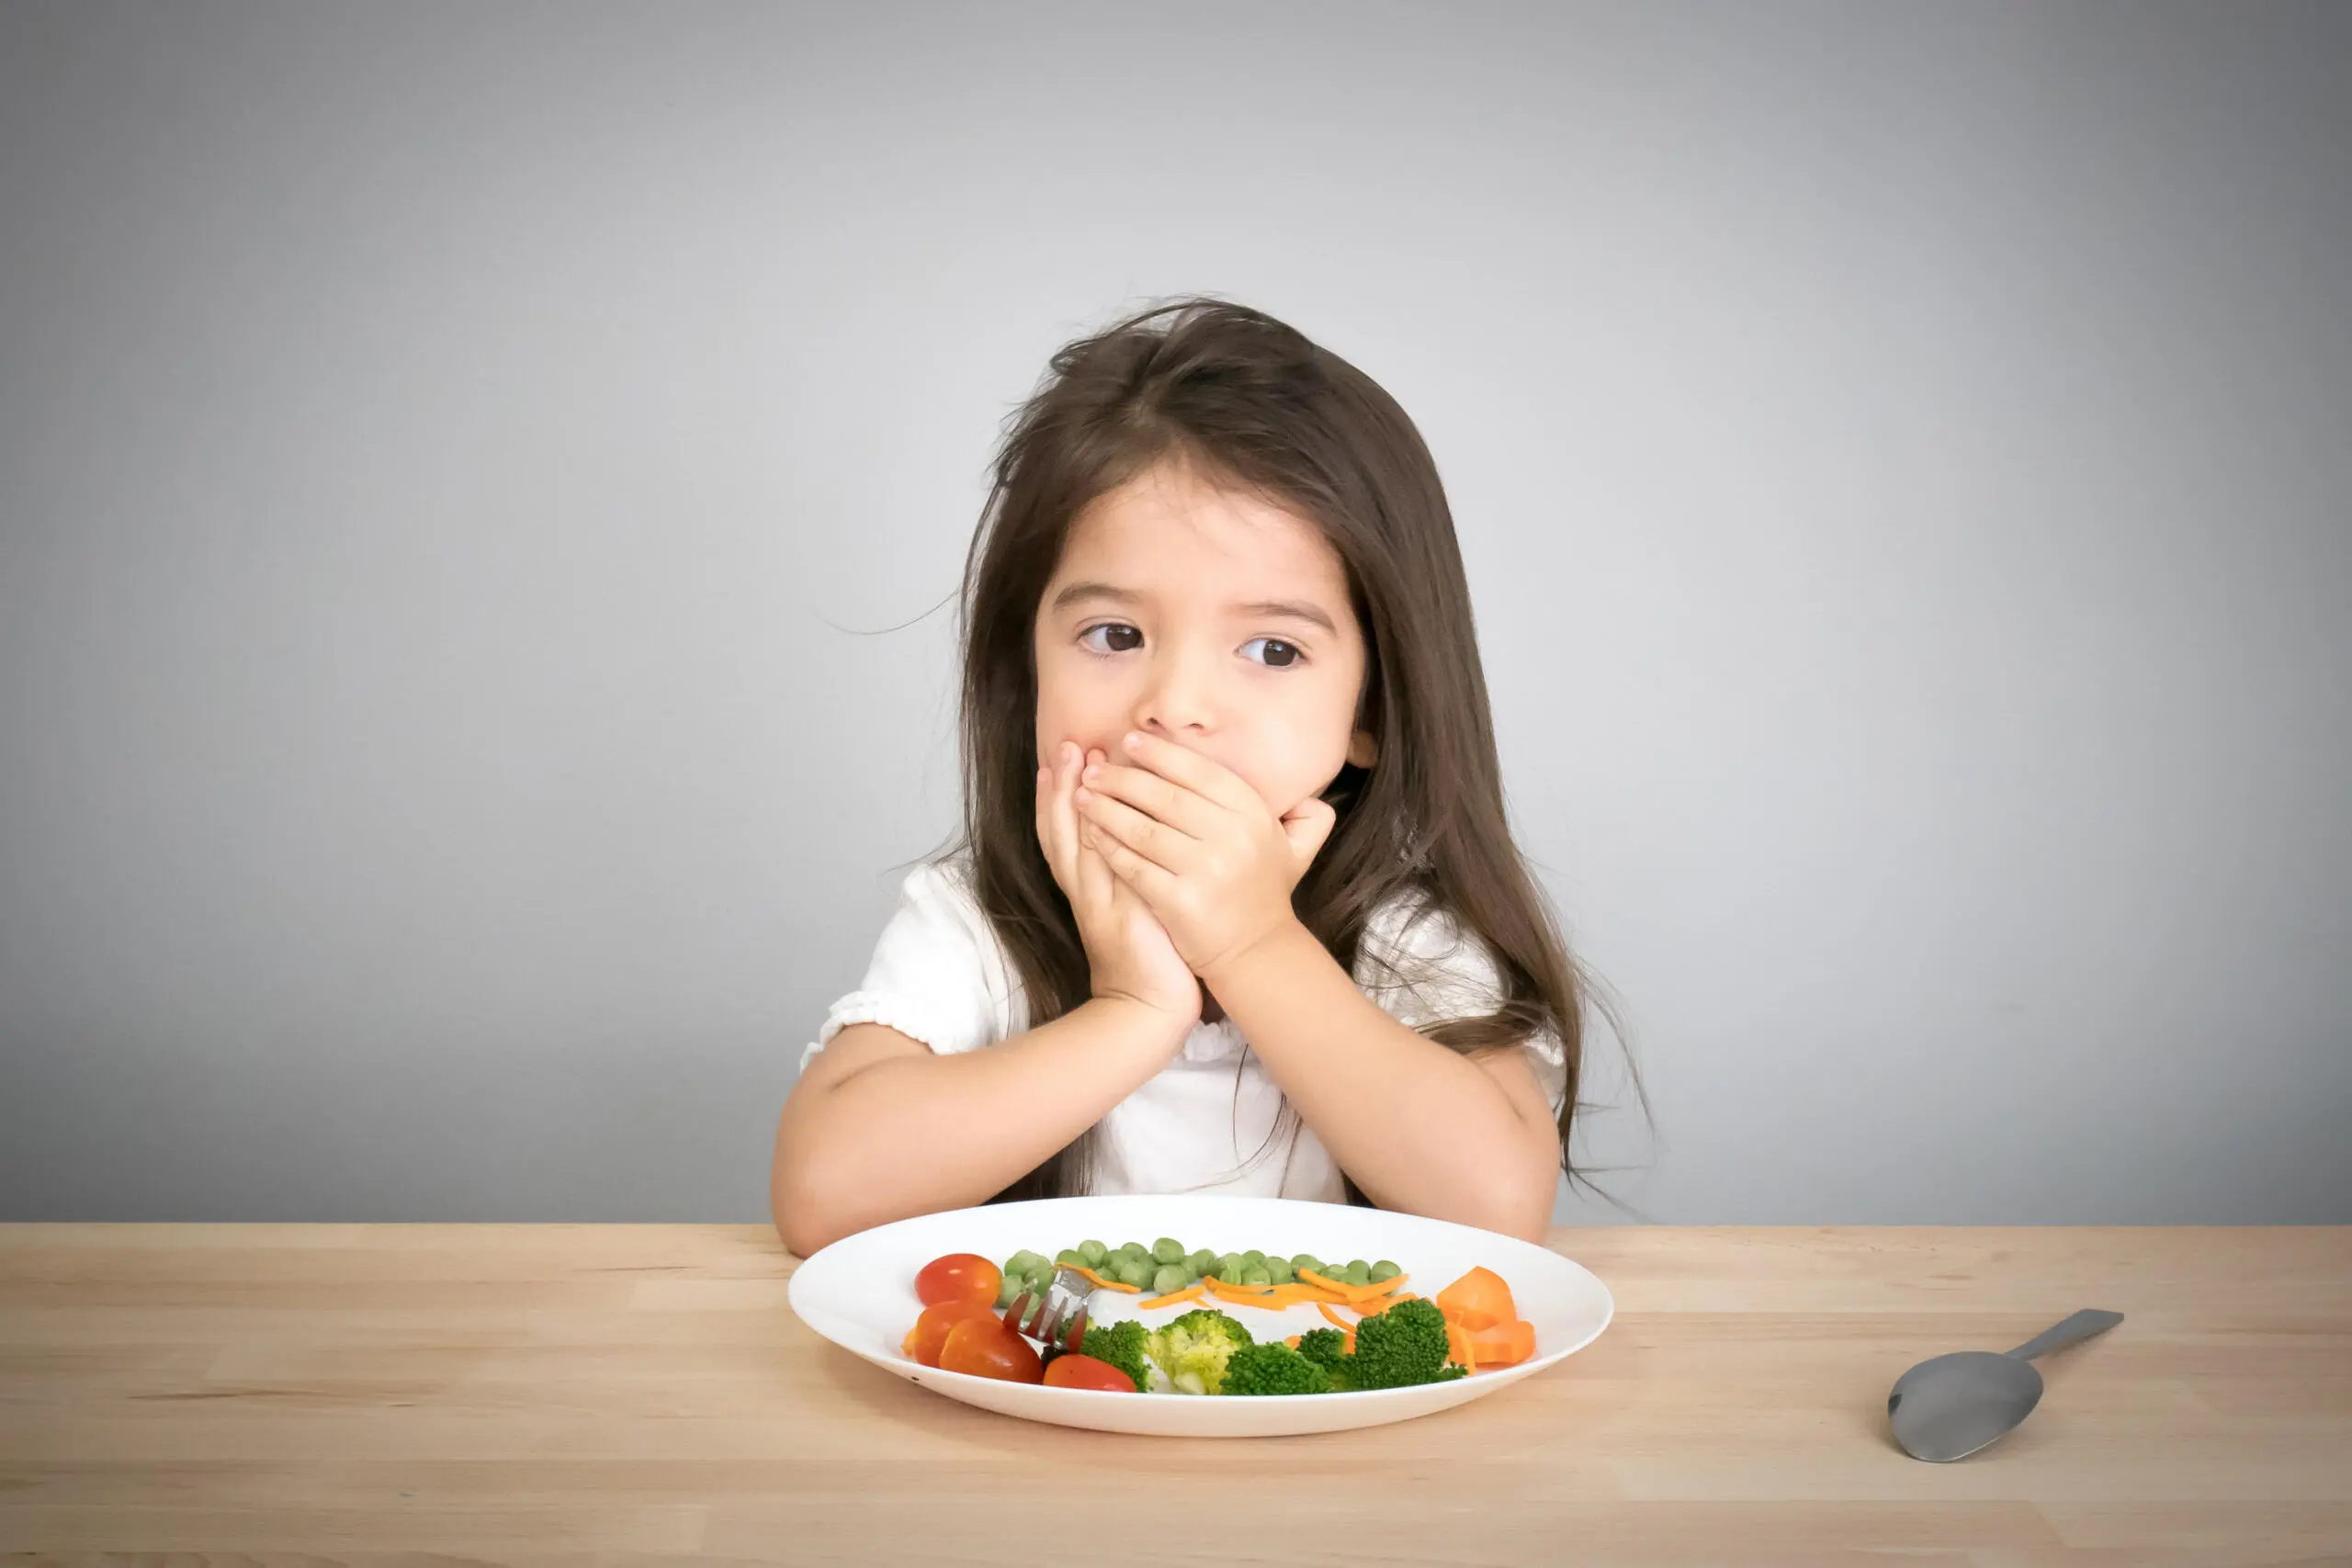 Tips for parents to deal with fussy eater